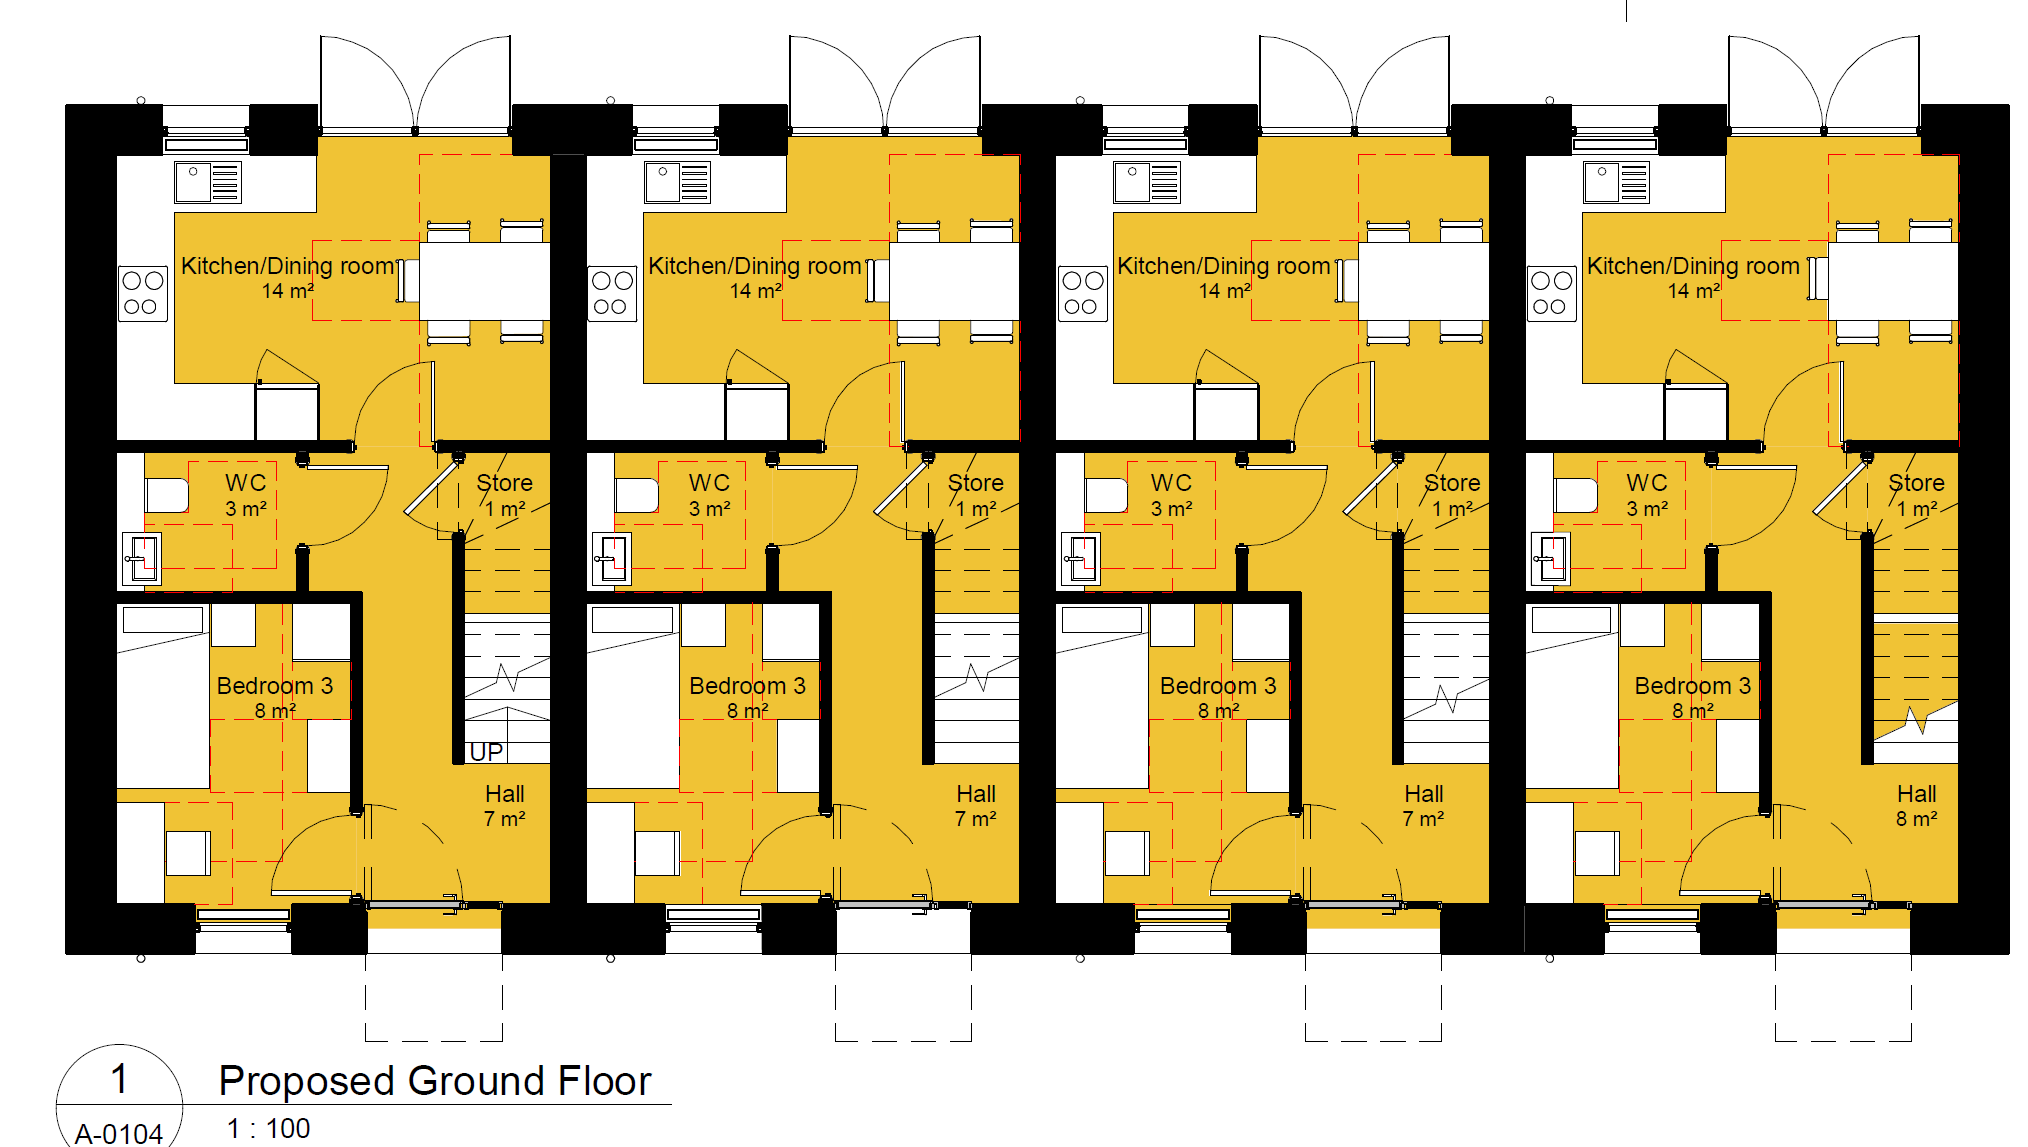 A ground floor plan of the four homes, which are identical, with a kitchen and dining room at the rear, a bedroom and entrance hall at the front with a toilet and storage space in between. 